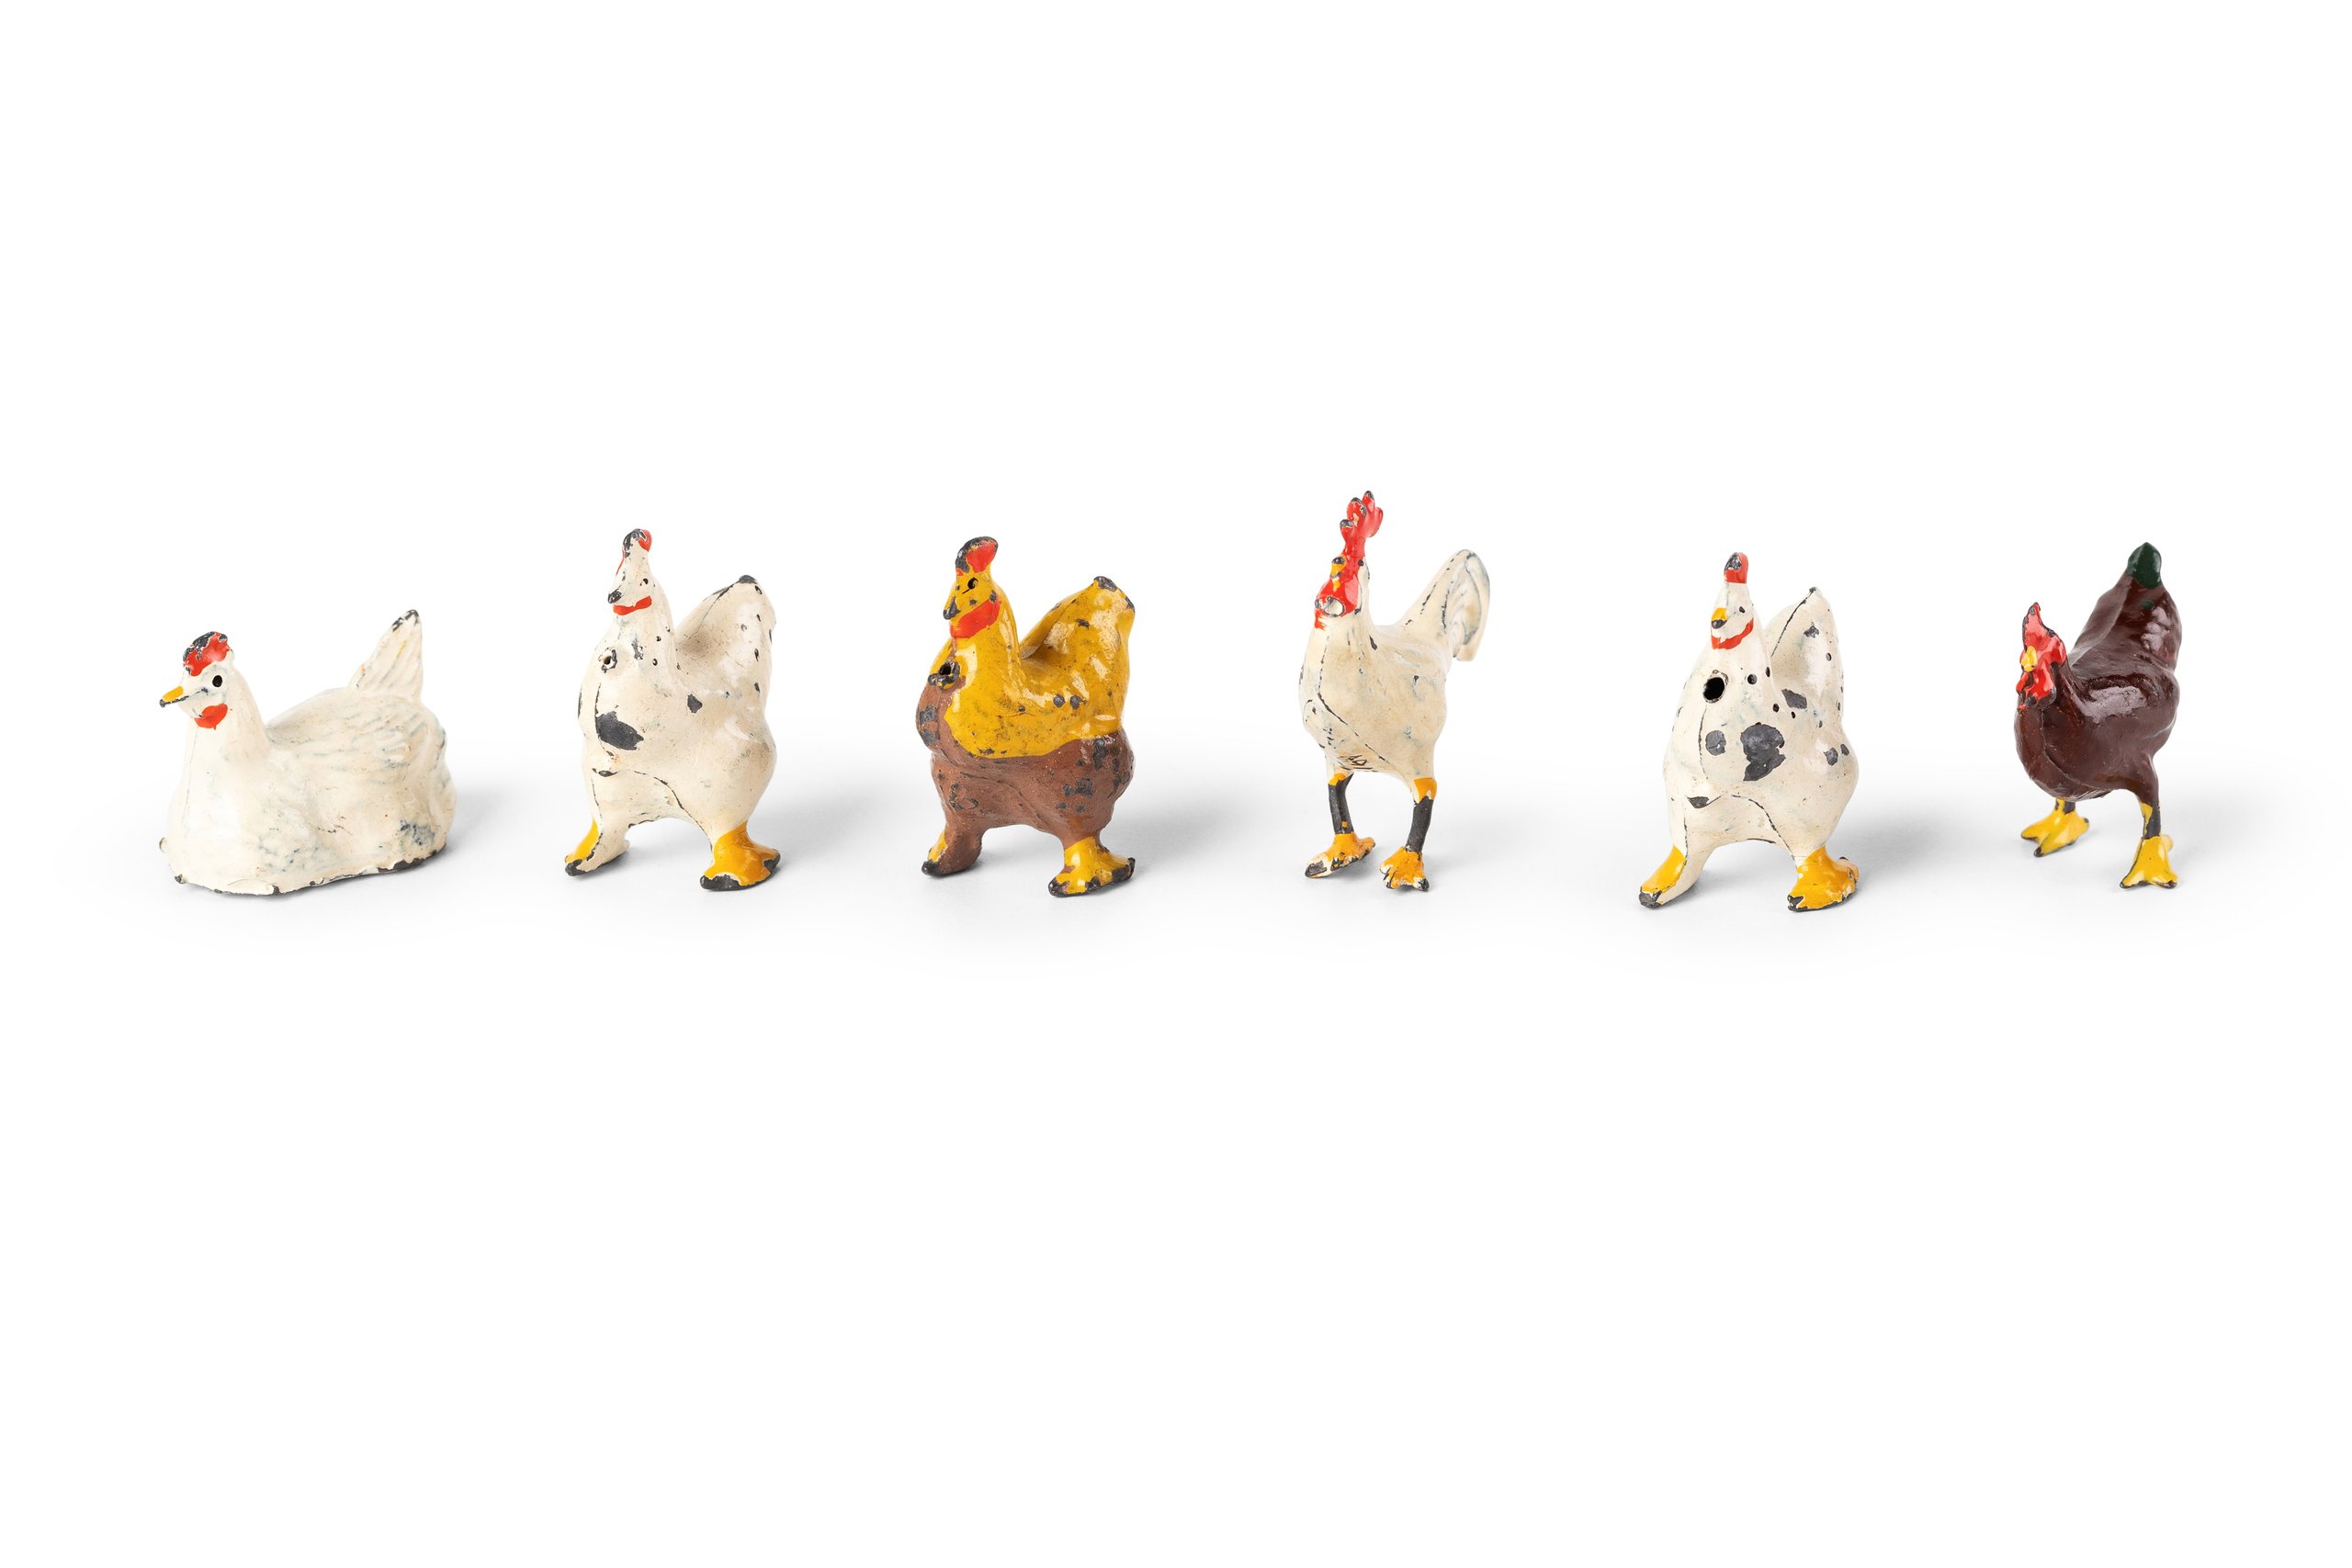 Hens and rooster from toy farm by W Britain